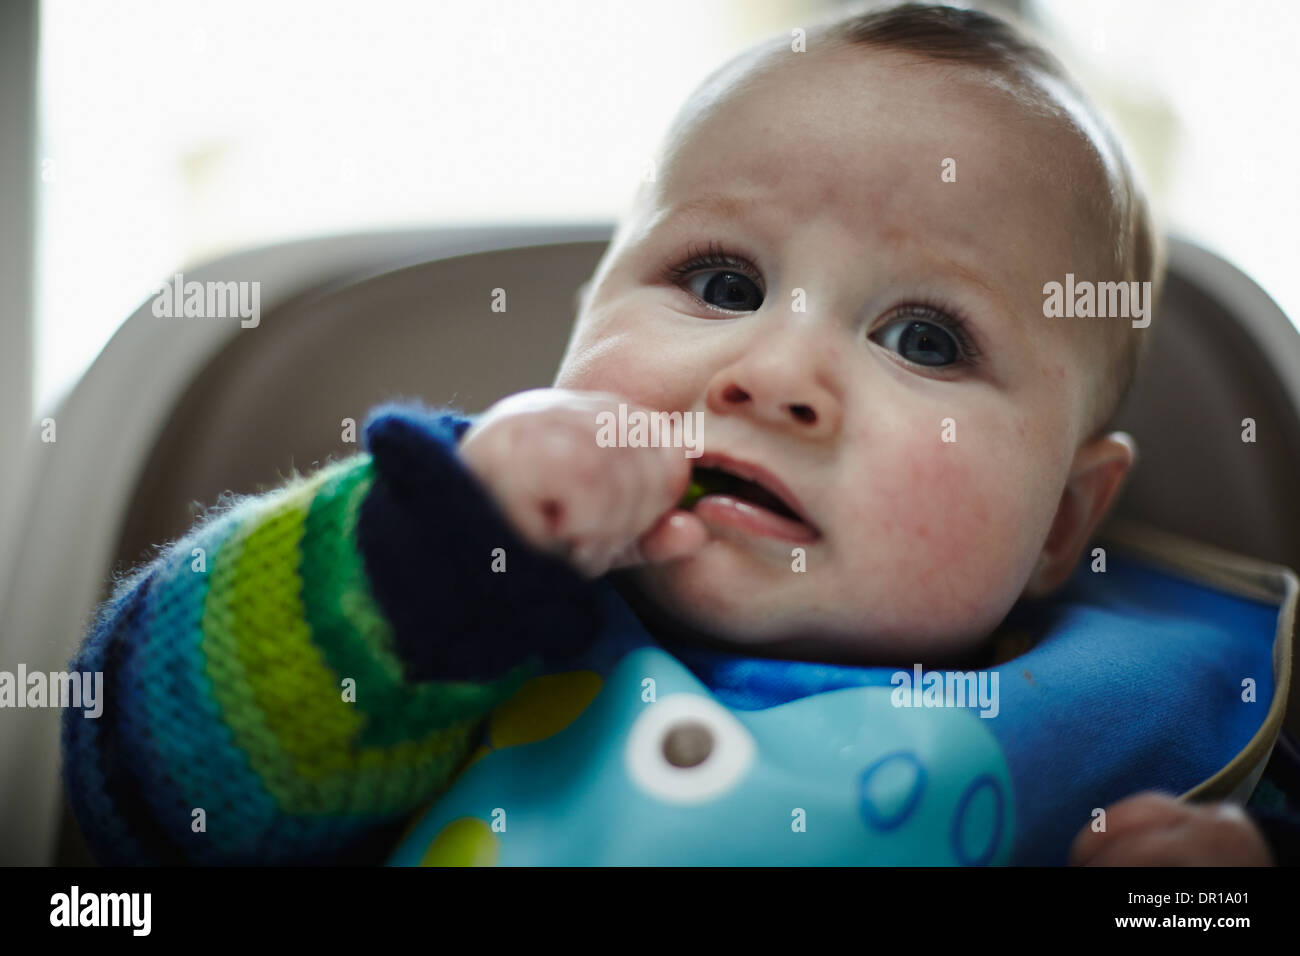 A baby around 5 and a half months eats a green vegetable as part of baby led weaning Stock Photo